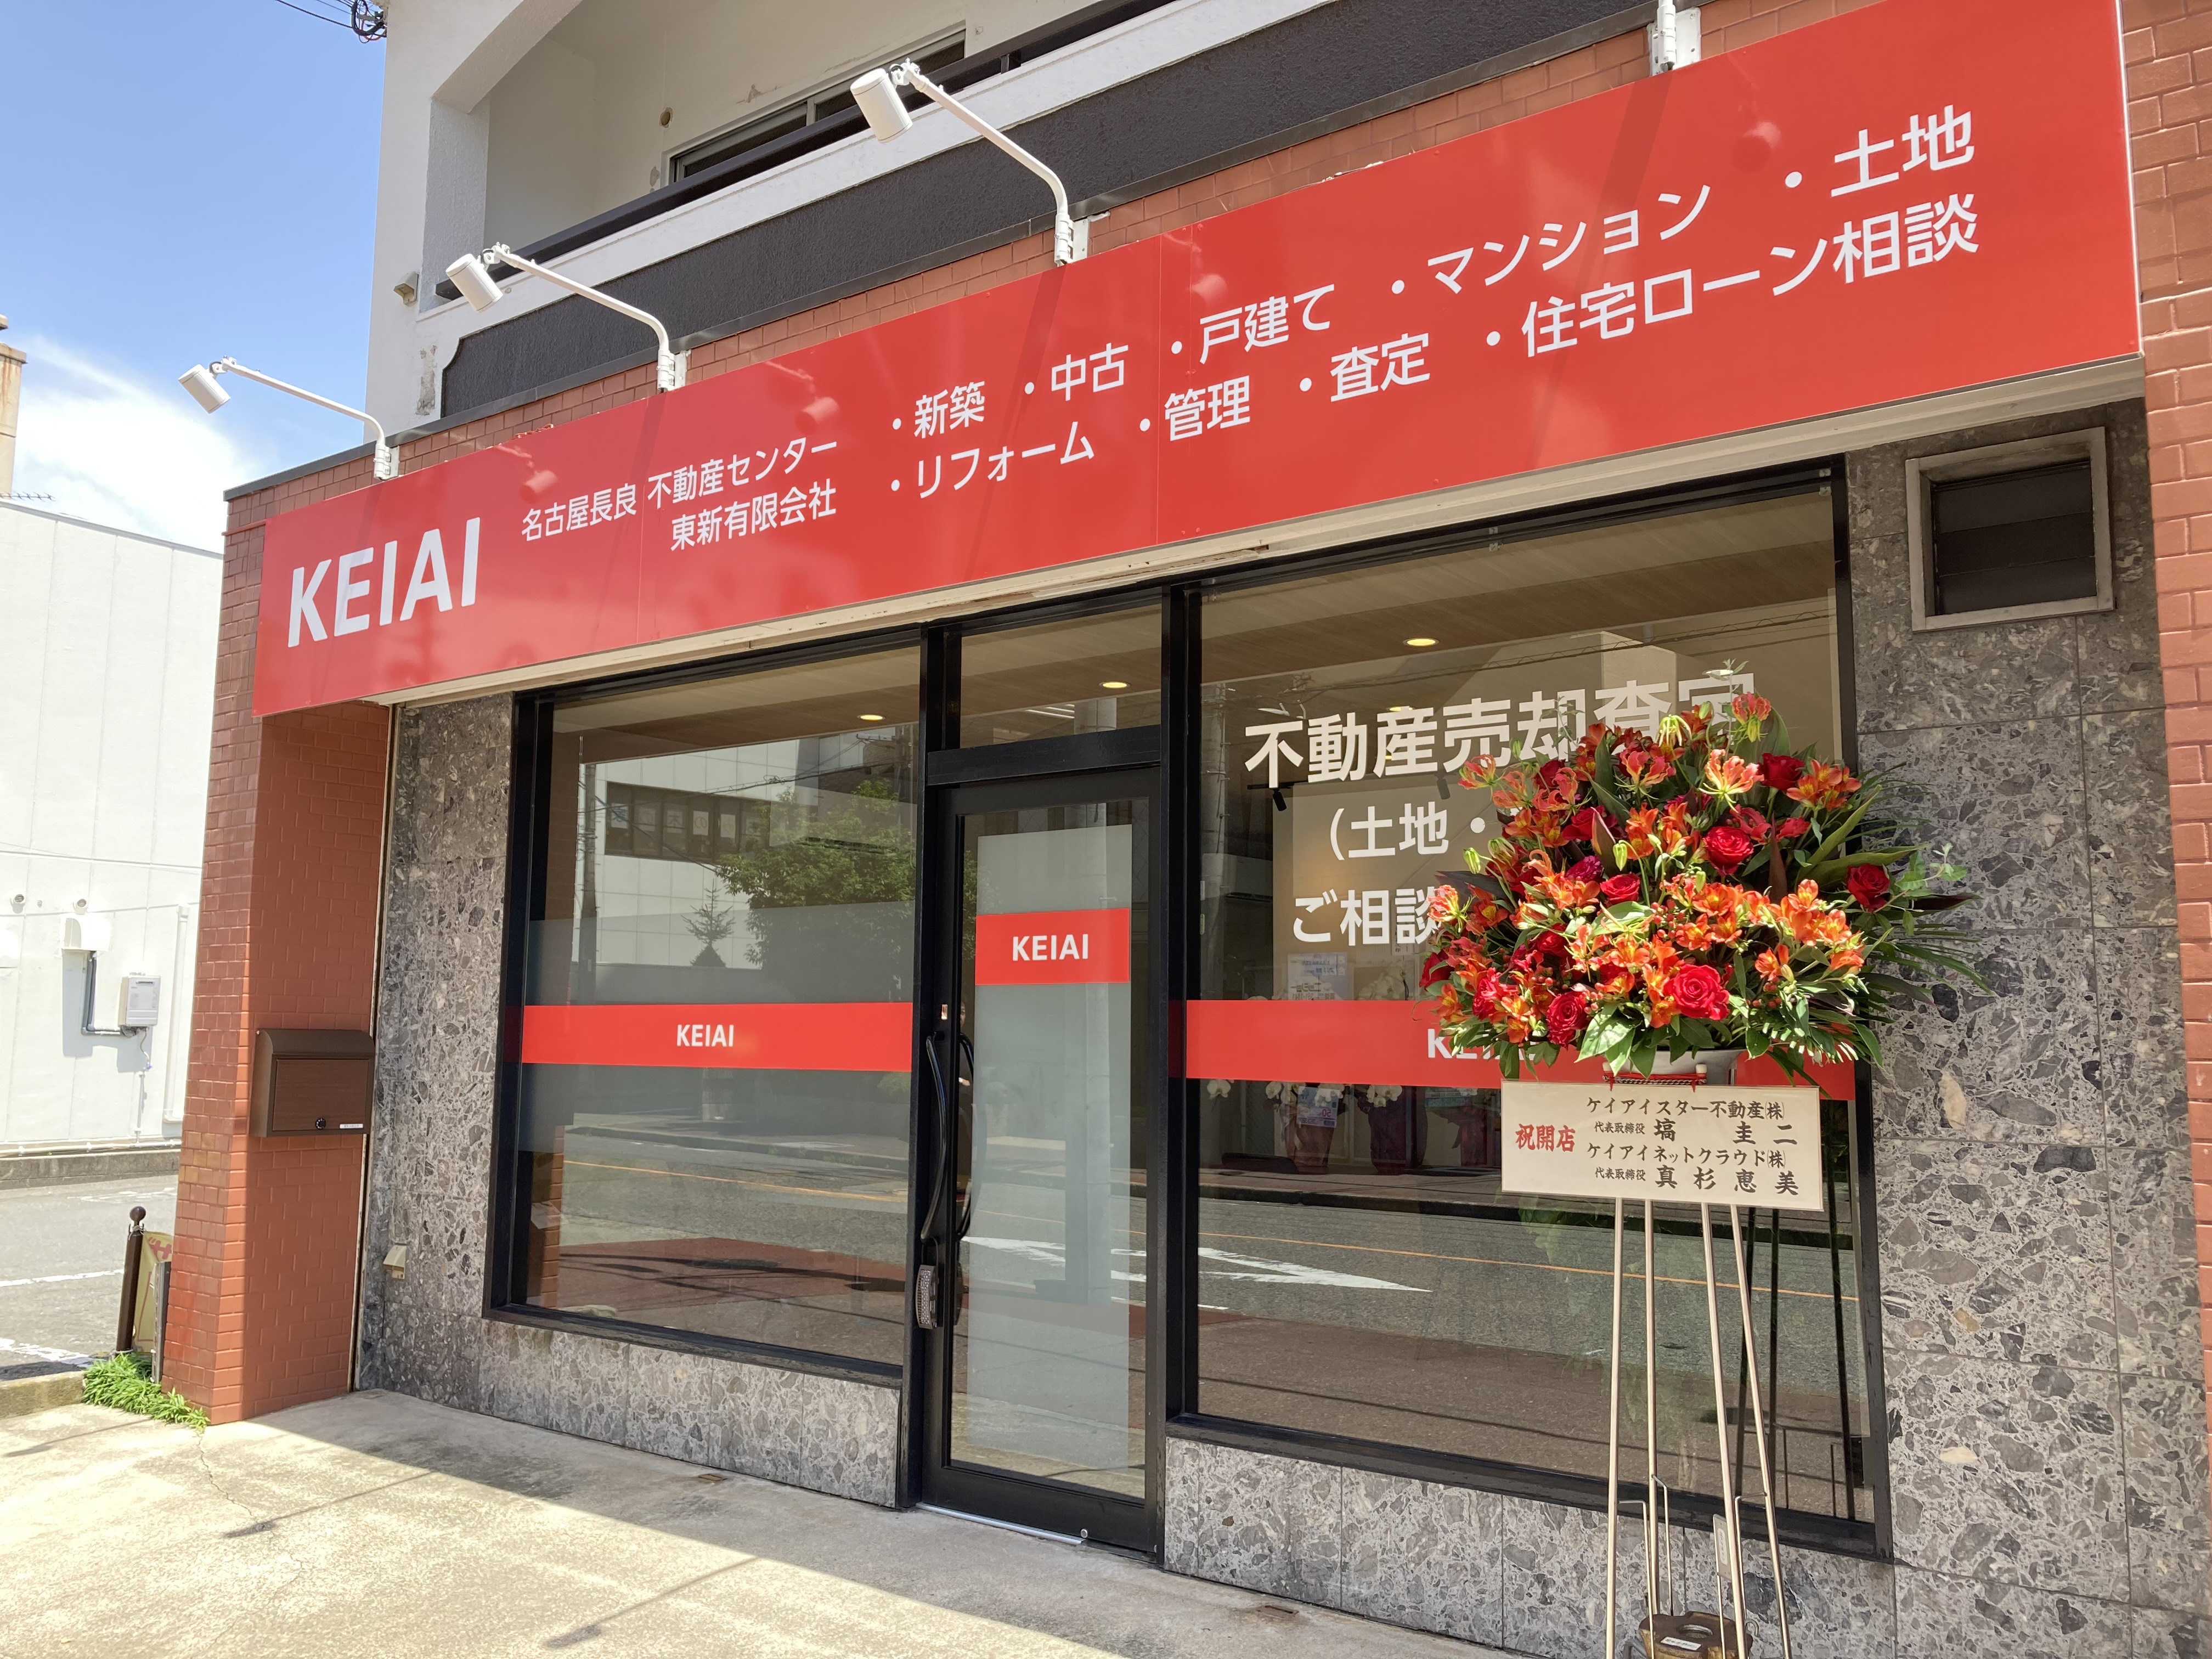 KEIAI 名古屋長良 不動産センター